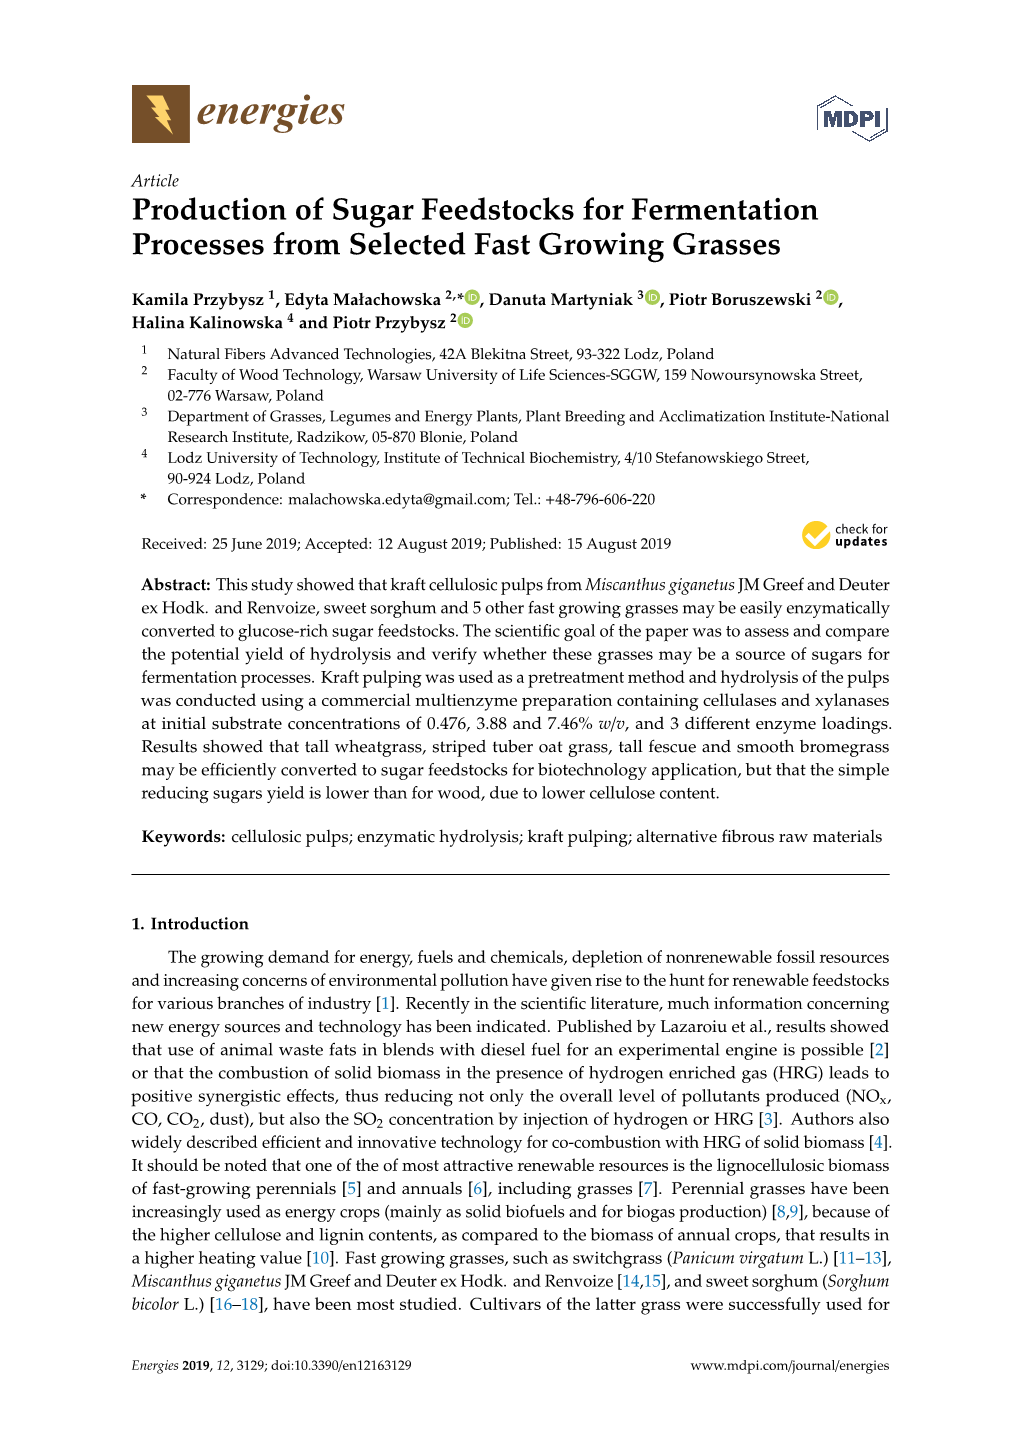 Production of Sugar Feedstocks for Fermentation Processes from Selected Fast Growing Grasses